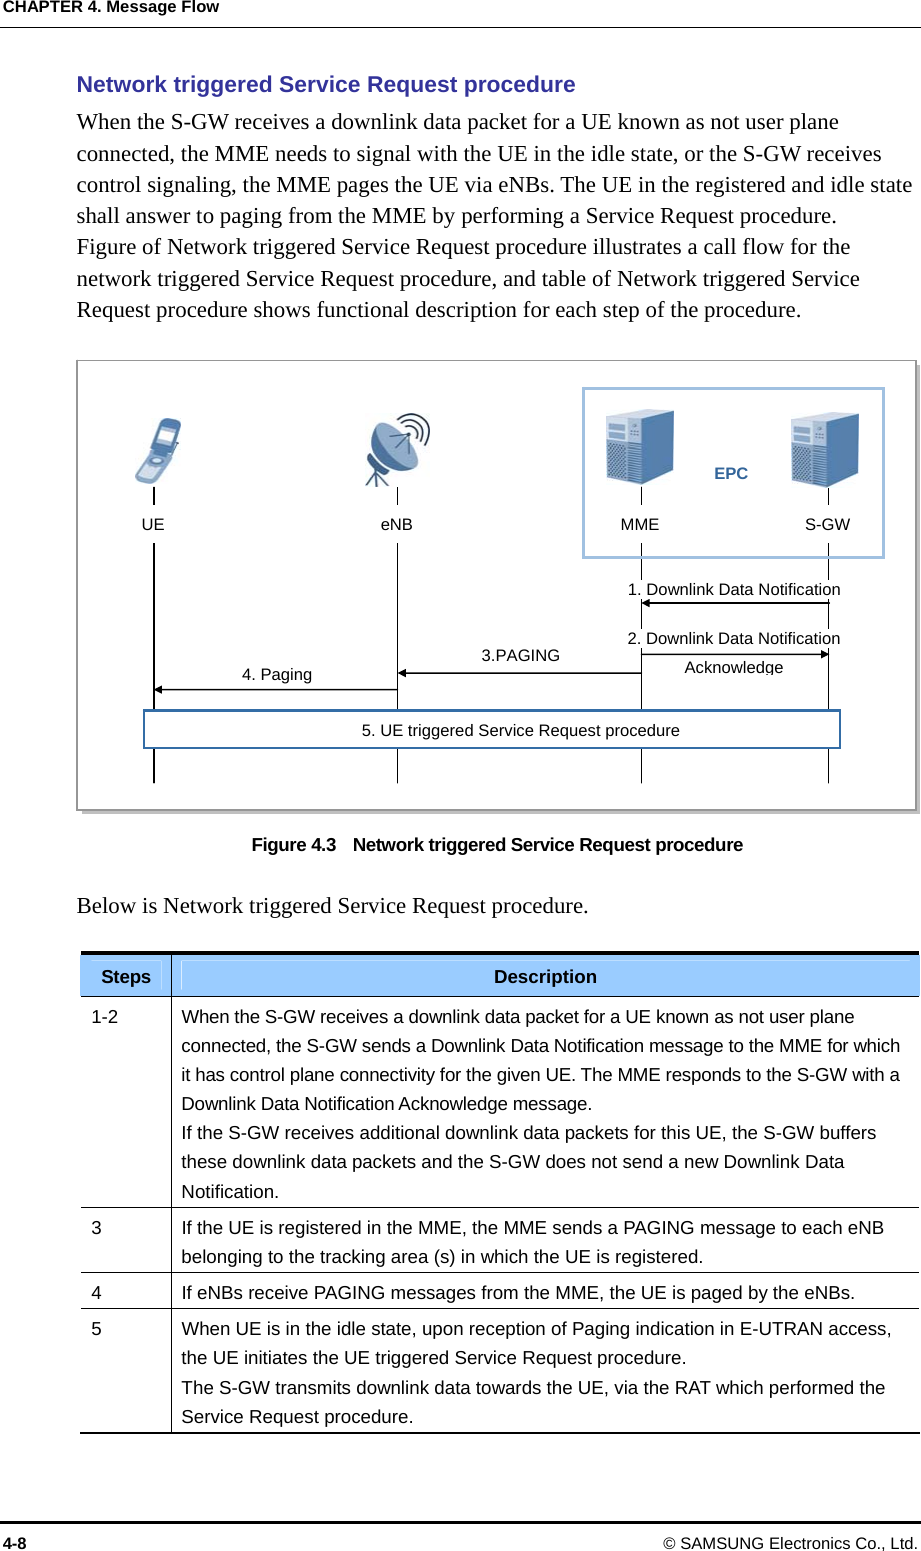 CHAPTER 4. Message Flow 4-8  © SAMSUNG Electronics Co., Ltd. Network triggered Service Request procedure When the S-GW receives a downlink data packet for a UE known as not user plane connected, the MME needs to signal with the UE in the idle state, or the S-GW receives control signaling, the MME pages the UE via eNBs. The UE in the registered and idle state shall answer to paging from the MME by performing a Service Request procedure. Figure of Network triggered Service Request procedure illustrates a call flow for the network triggered Service Request procedure, and table of Network triggered Service Request procedure shows functional description for each step of the procedure.  Figure 4.3    Network triggered Service Request procedure  Below is Network triggered Service Request procedure.  Steps  Description 1-2  When the S-GW receives a downlink data packet for a UE known as not user plane connected, the S-GW sends a Downlink Data Notification message to the MME for which it has control plane connectivity for the given UE. The MME responds to the S-GW with a Downlink Data Notification Acknowledge message. If the S-GW receives additional downlink data packets for this UE, the S-GW buffers these downlink data packets and the S-GW does not send a new Downlink Data Notification. 3  If the UE is registered in the MME, the MME sends a PAGING message to each eNB belonging to the tracking area (s) in which the UE is registered. 4  If eNBs receive PAGING messages from the MME, the UE is paged by the eNBs. 5  When UE is in the idle state, upon reception of Paging indication in E-UTRAN access, the UE initiates the UE triggered Service Request procedure. The S-GW transmits downlink data towards the UE, via the RAT which performed the Service Request procedure. UE  eNB MME  S-GW EPC 5. UE triggered Service Request procedure 4. Paging 1. Downlink Data Notification 2. Downlink Data Notification Acknowledge 3.PAGING 